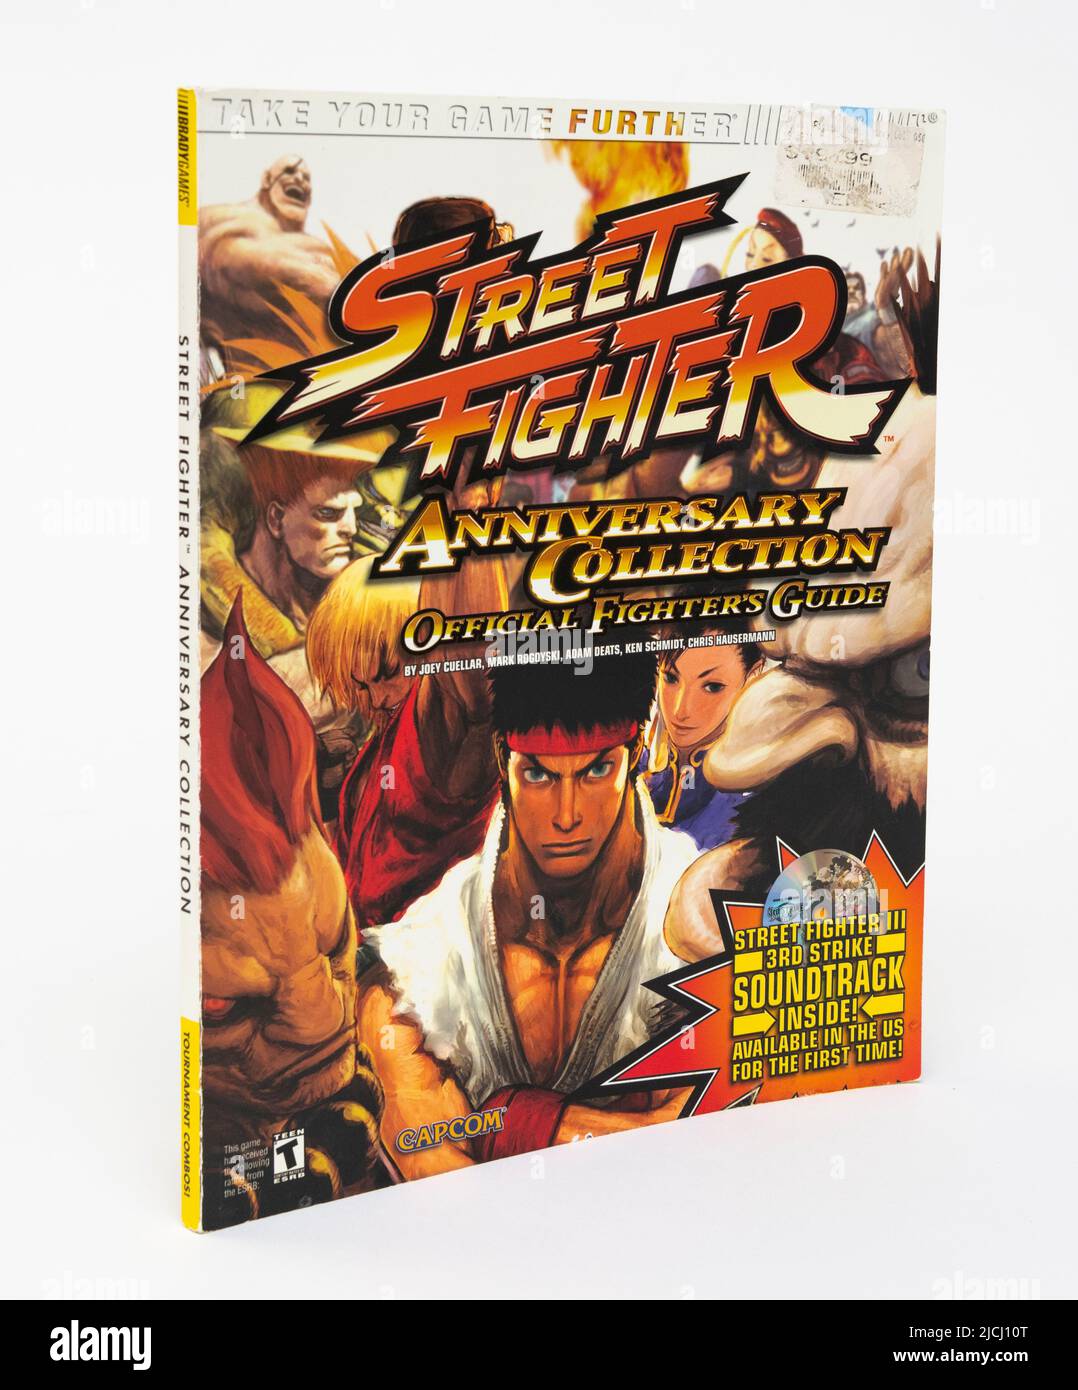 Street Fighter Anniversary Collection official strategy guide, published by Brady Games. Stock Photo